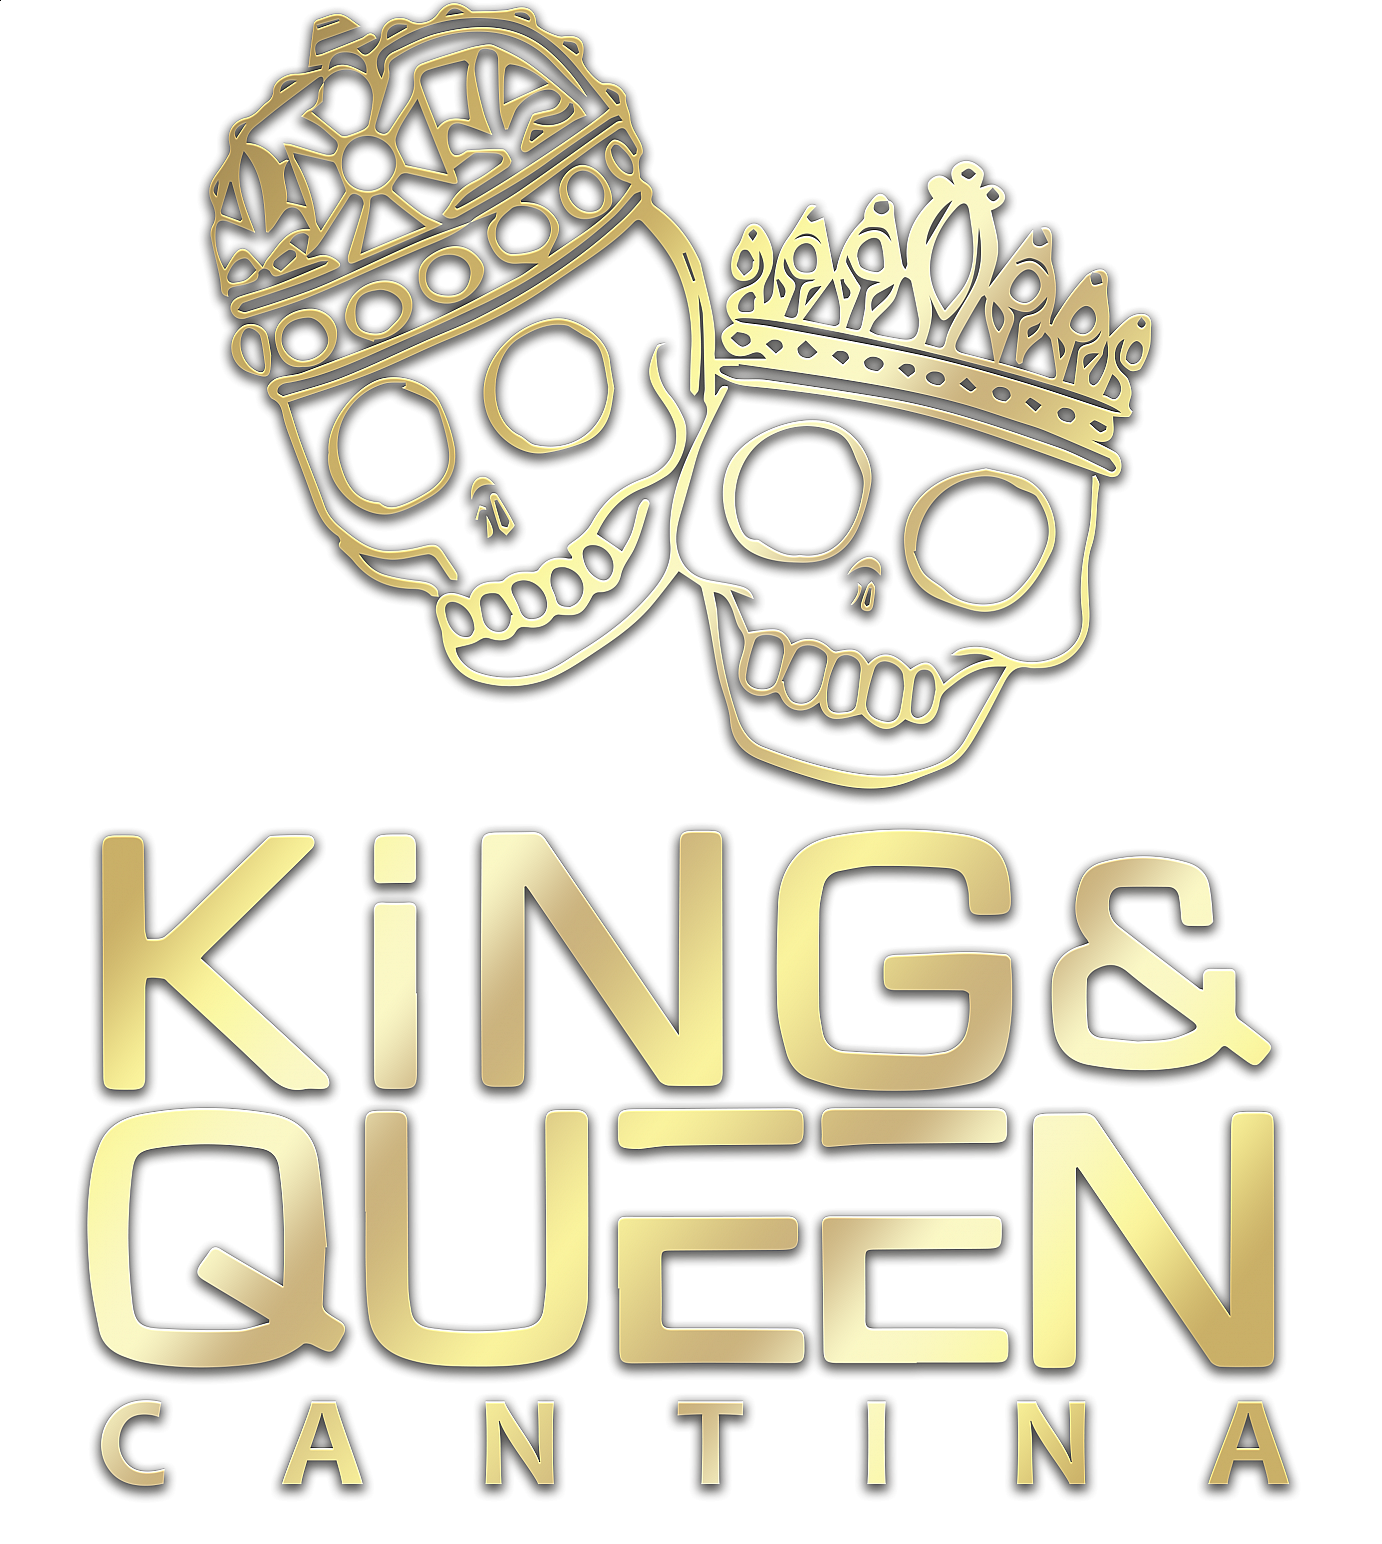 King and Queen Cantina logo gold